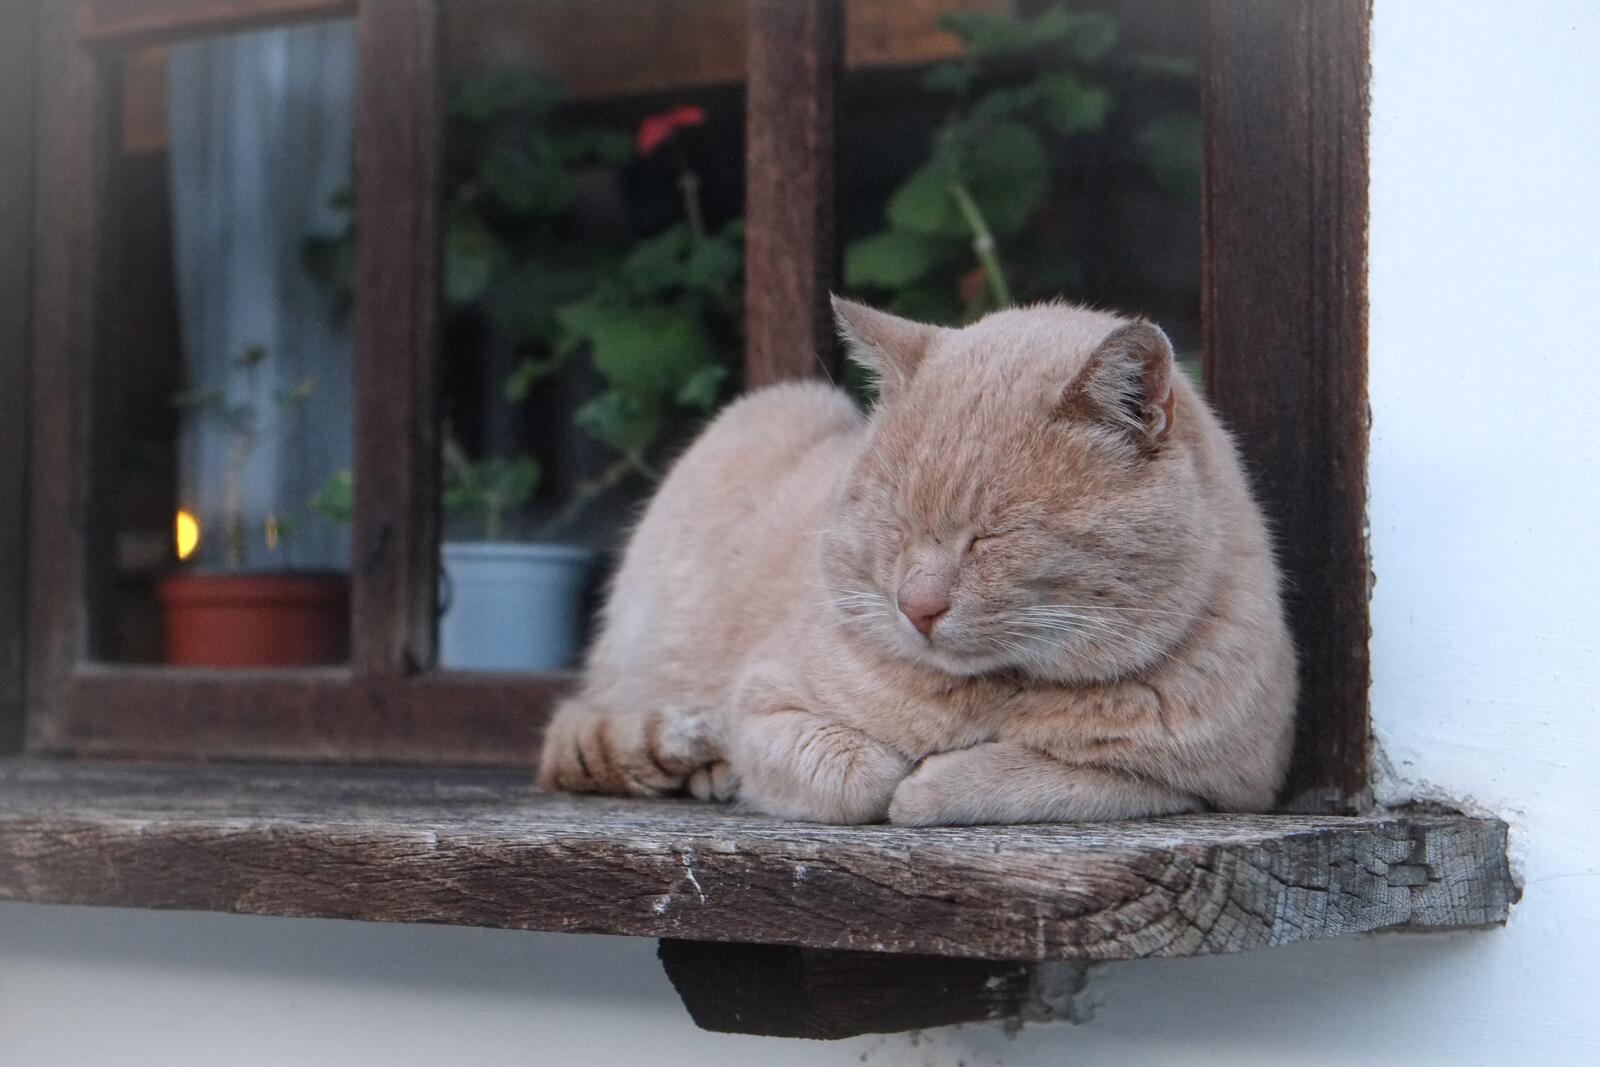 Free photo A gray cat sleeps on a wooden window sill